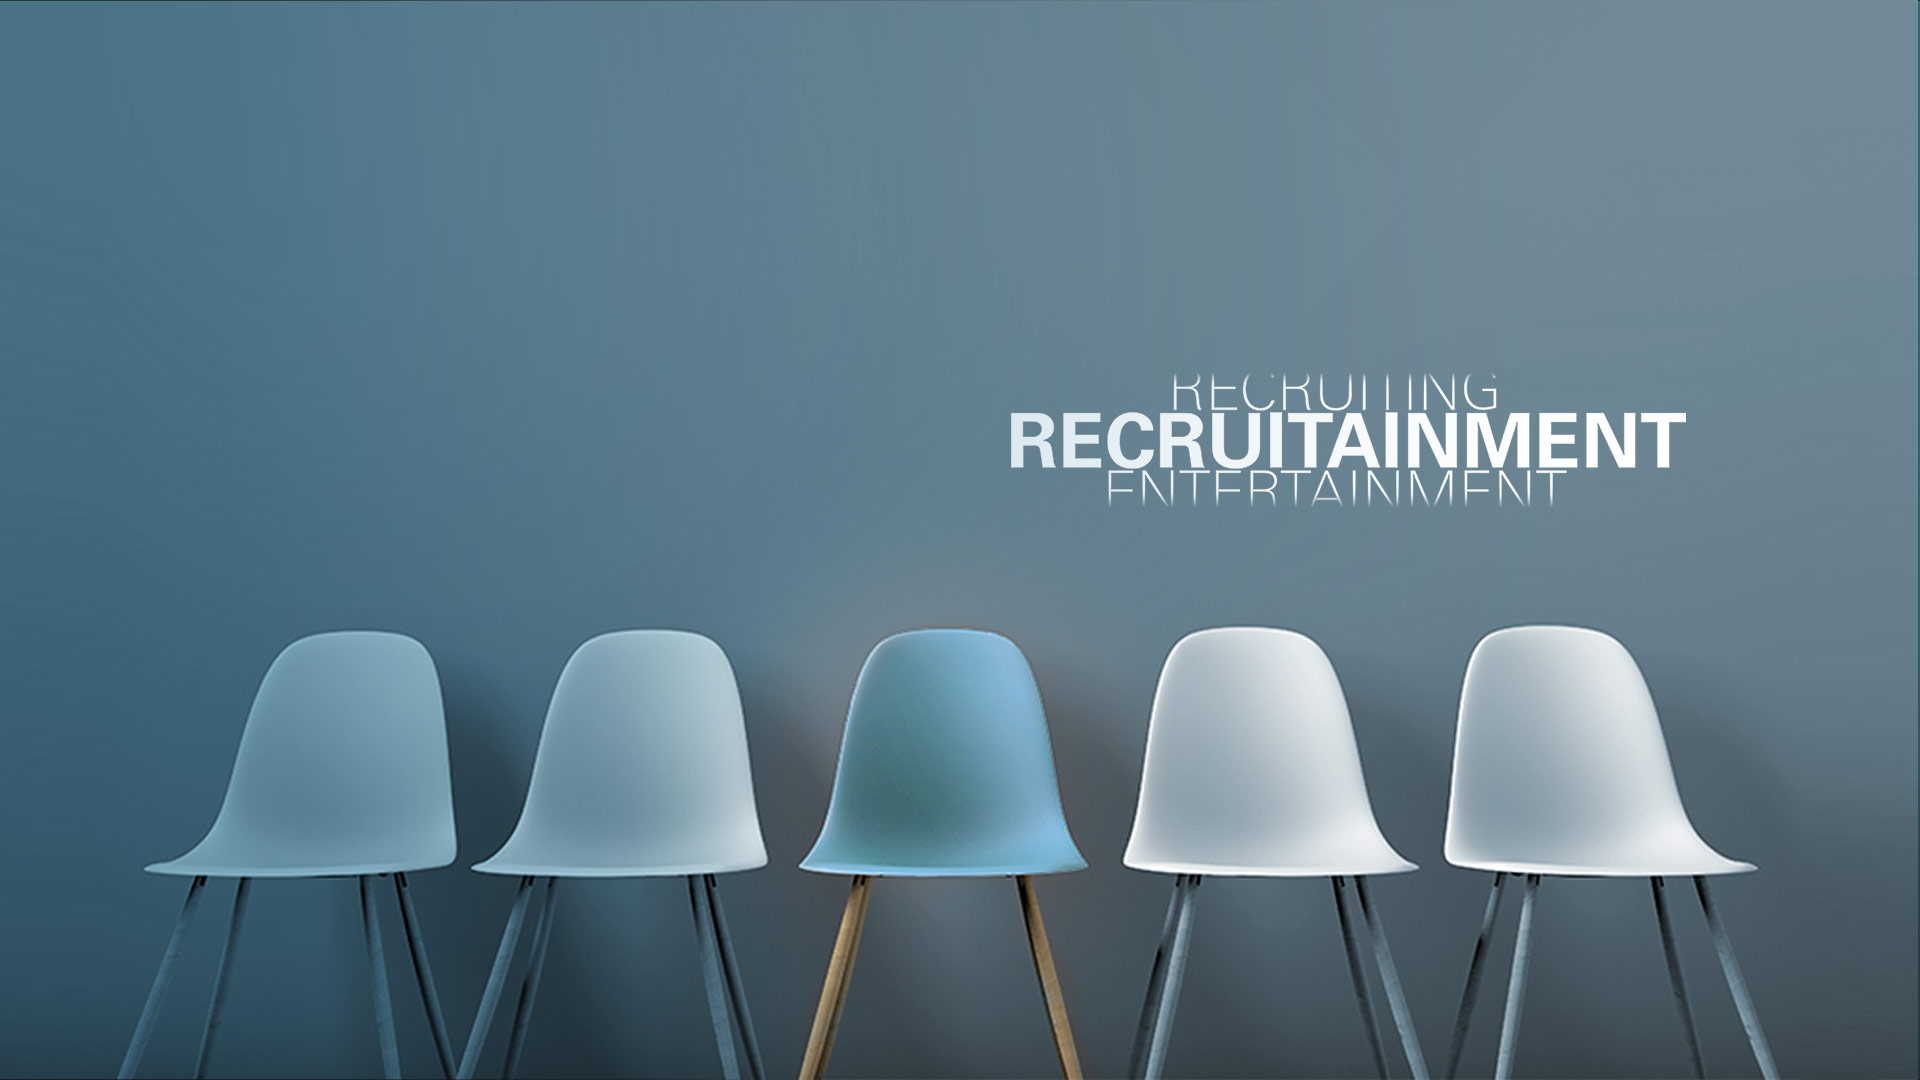 atreus_header transformation in the recruiting process 1